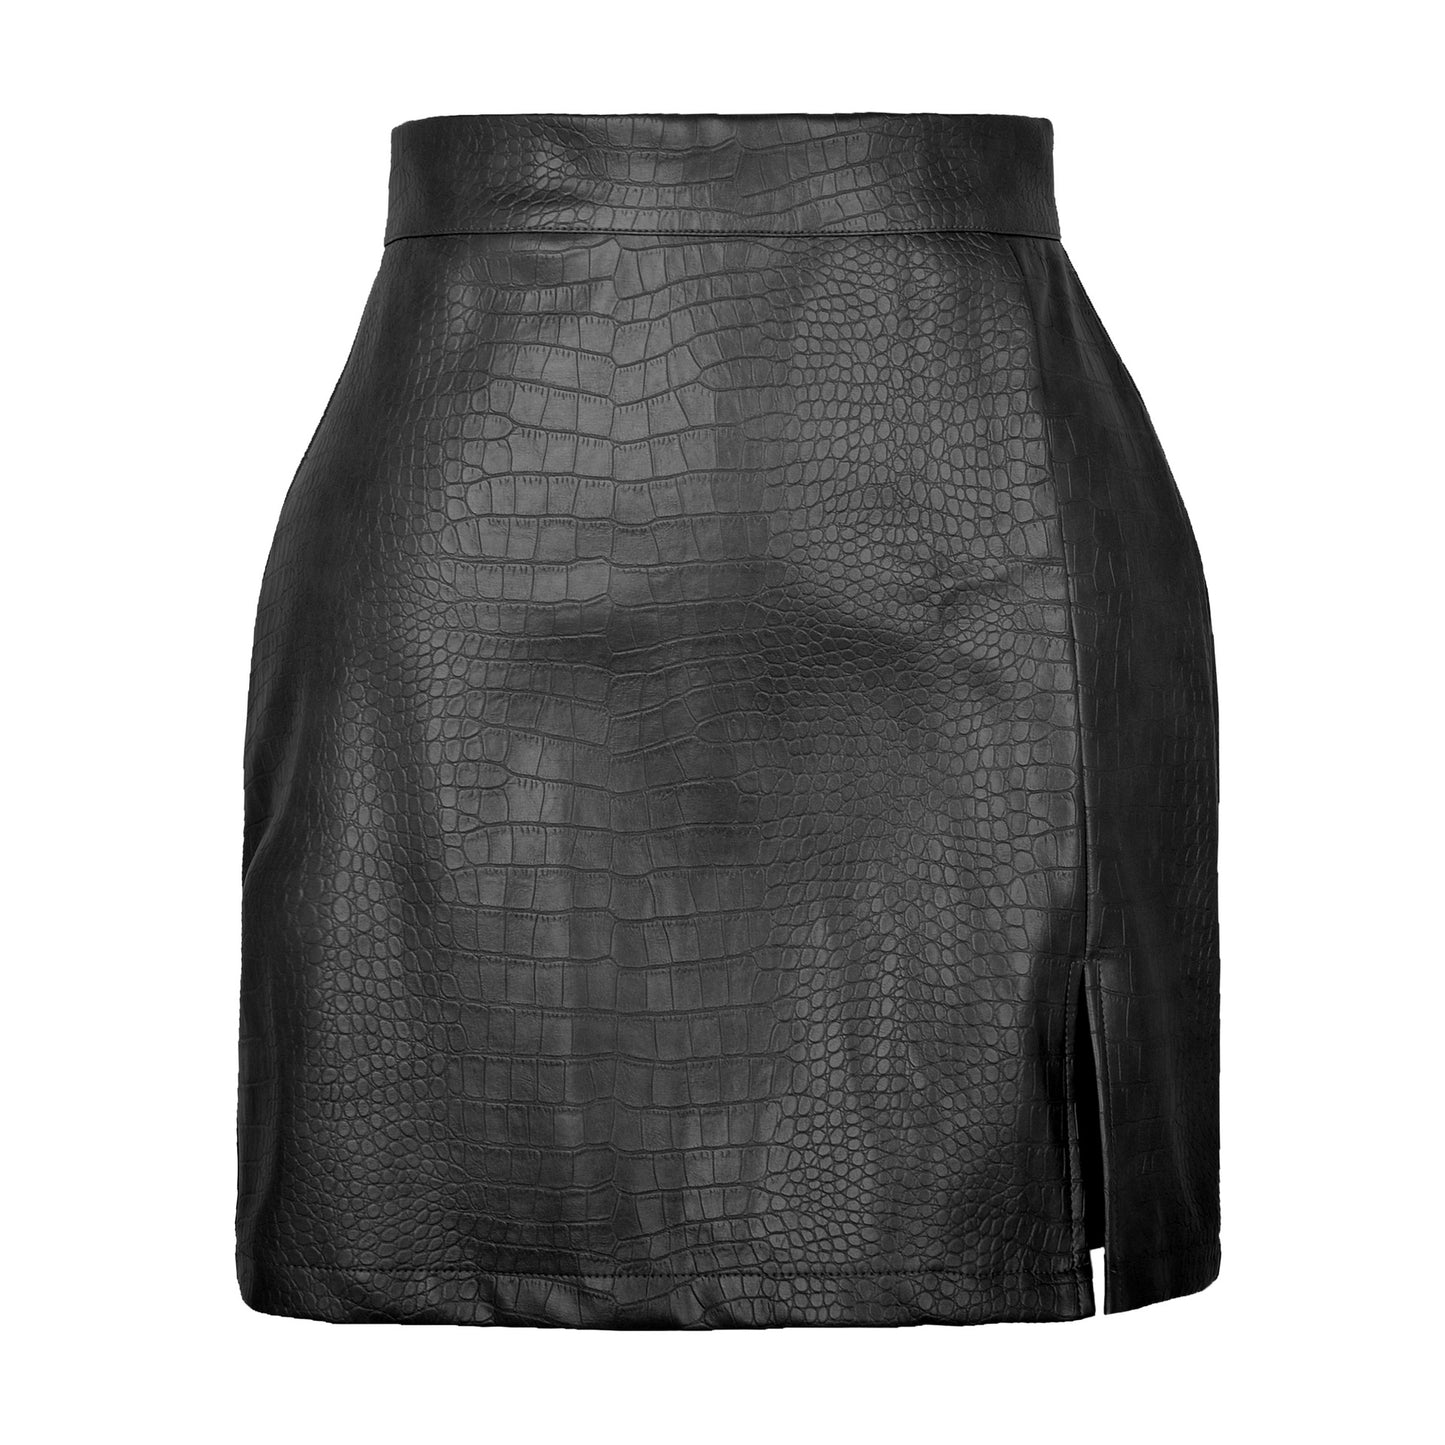 Fashionable PU Leather Skirt with Side-Slit